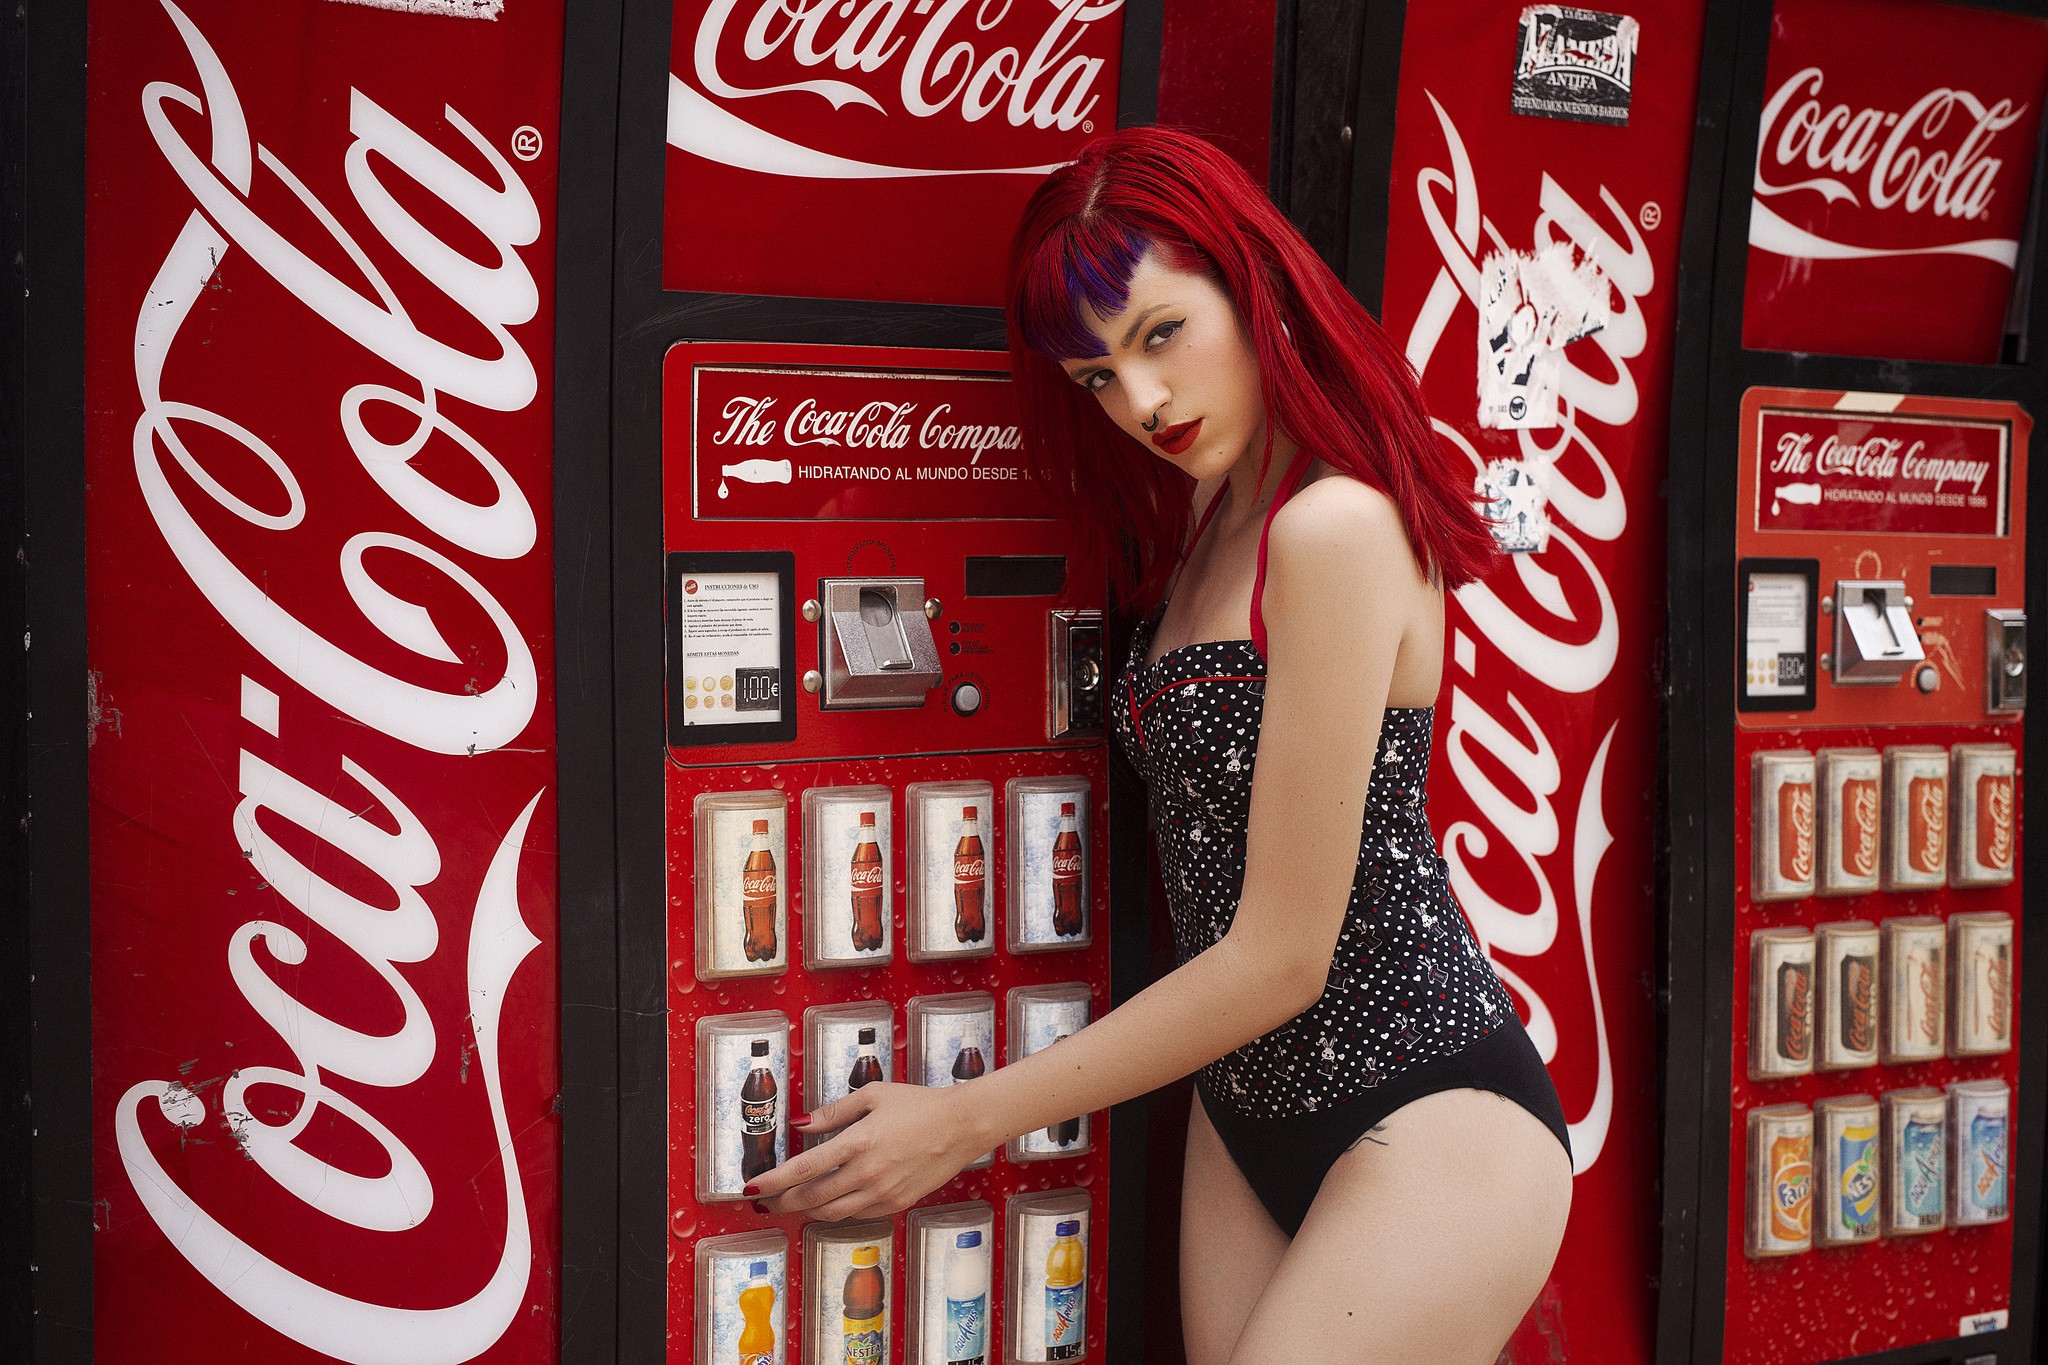 People 2048x1365 black panties women model Coca-Cola red redhead logo red lipstick drink soda vending machine brand makeup nose ring dyed hair looking at viewer